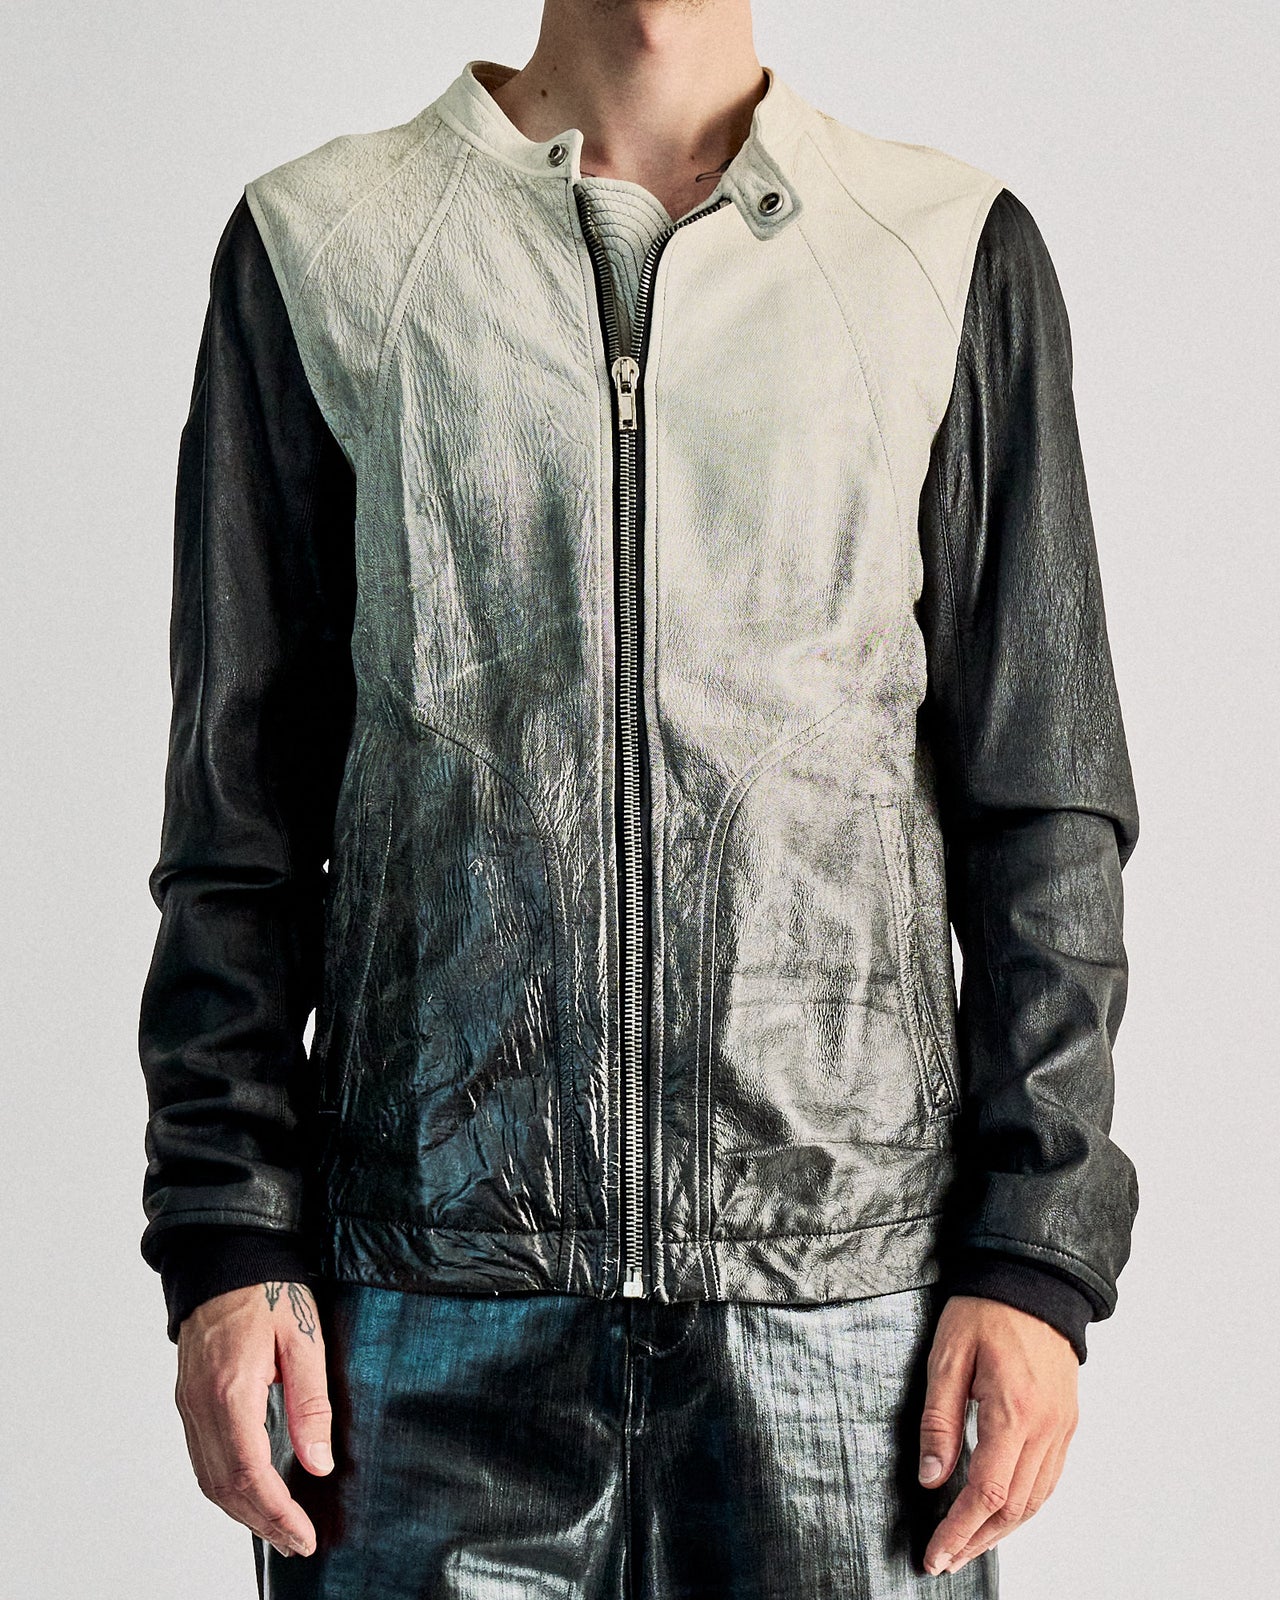 Rick Owens SS 2009 Gradient leather bomber jacket